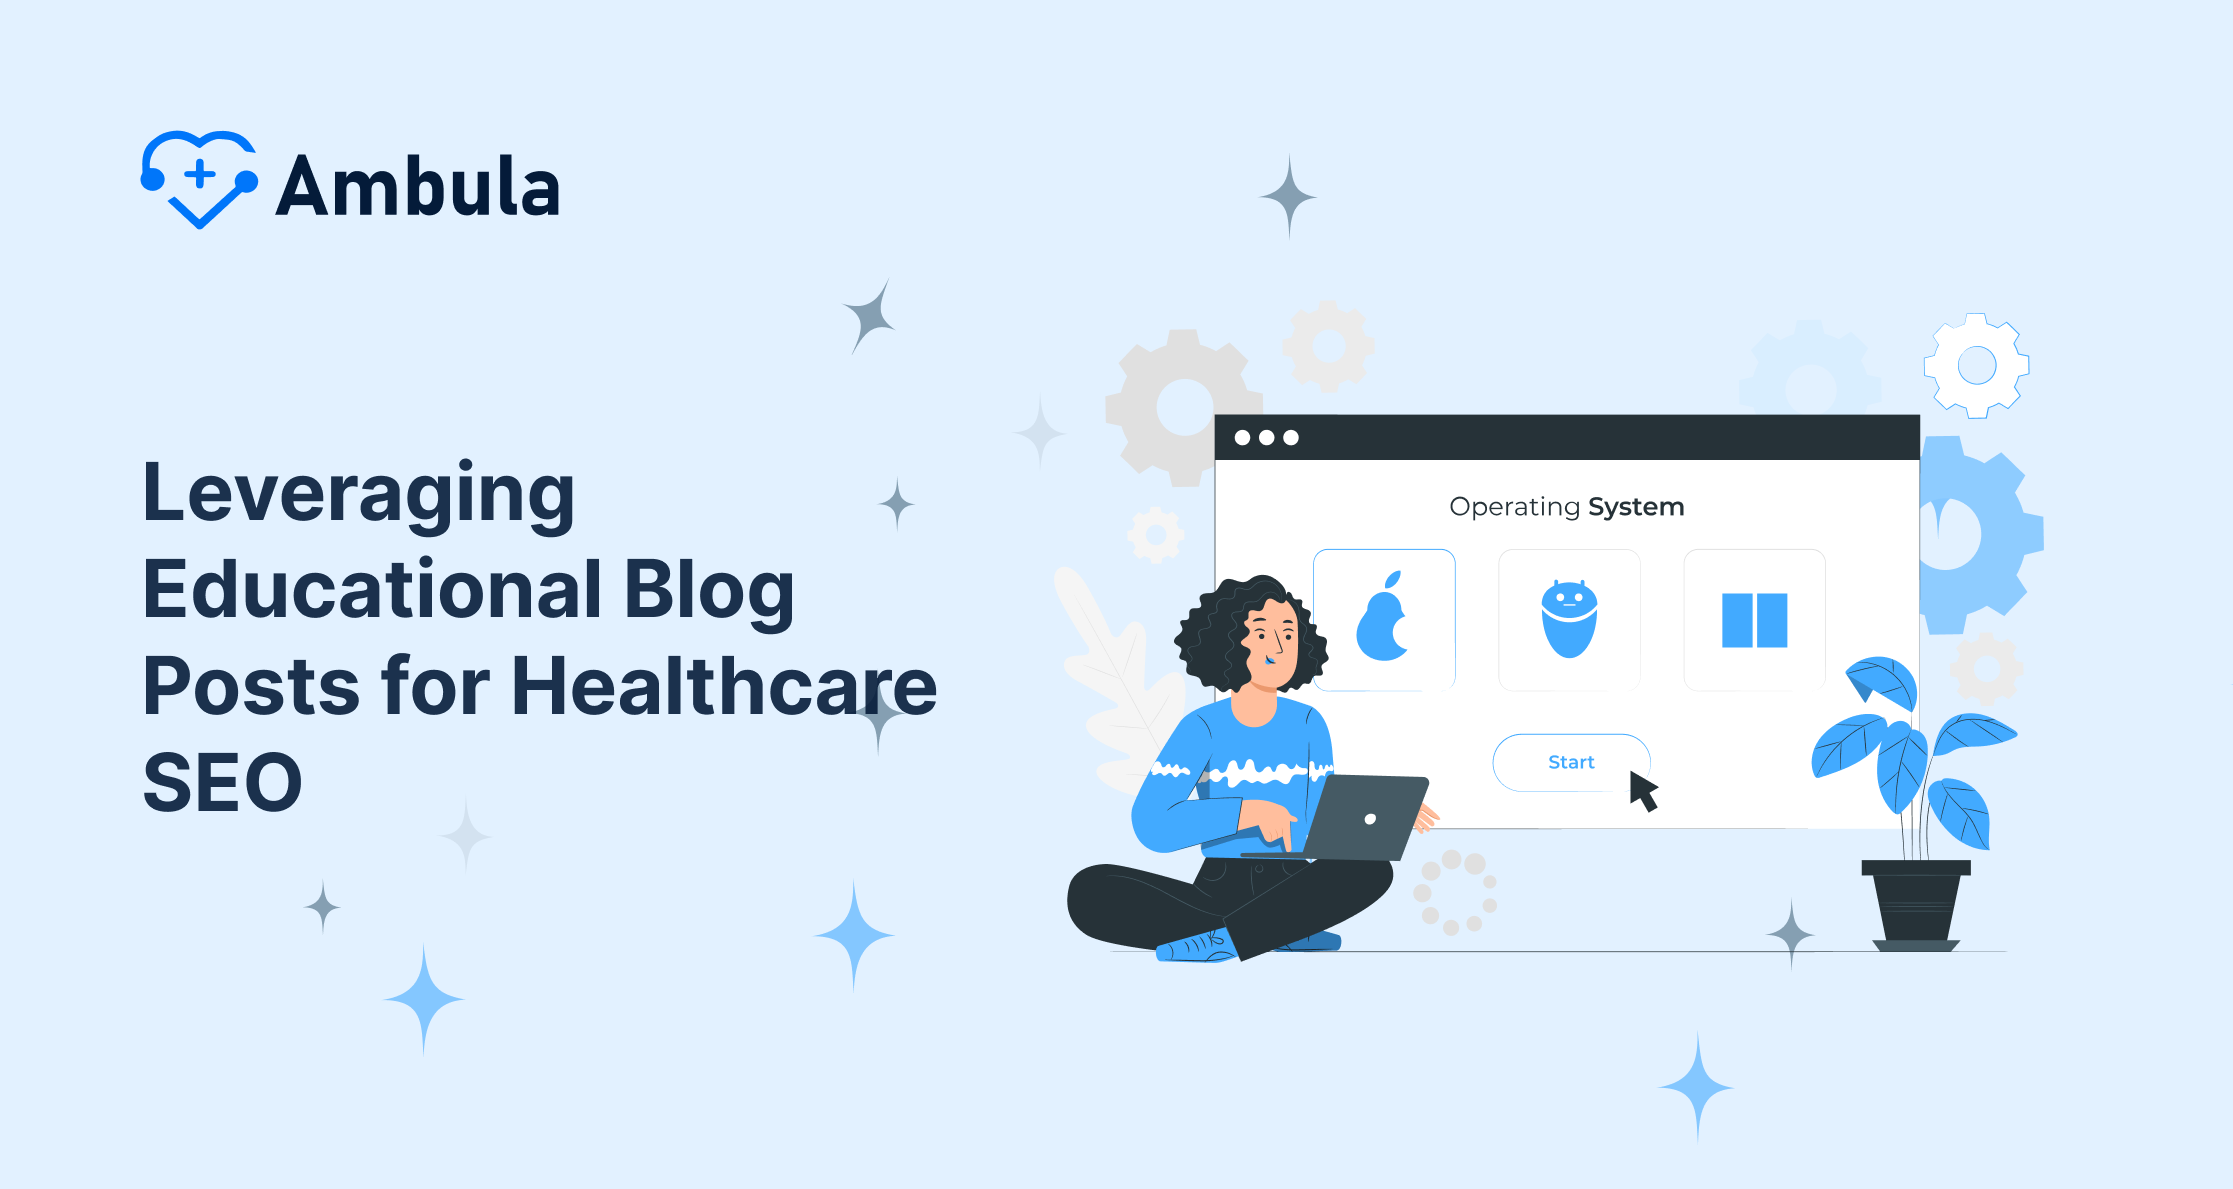 Leveraging Educational Blog Posts for Healthcare SEO